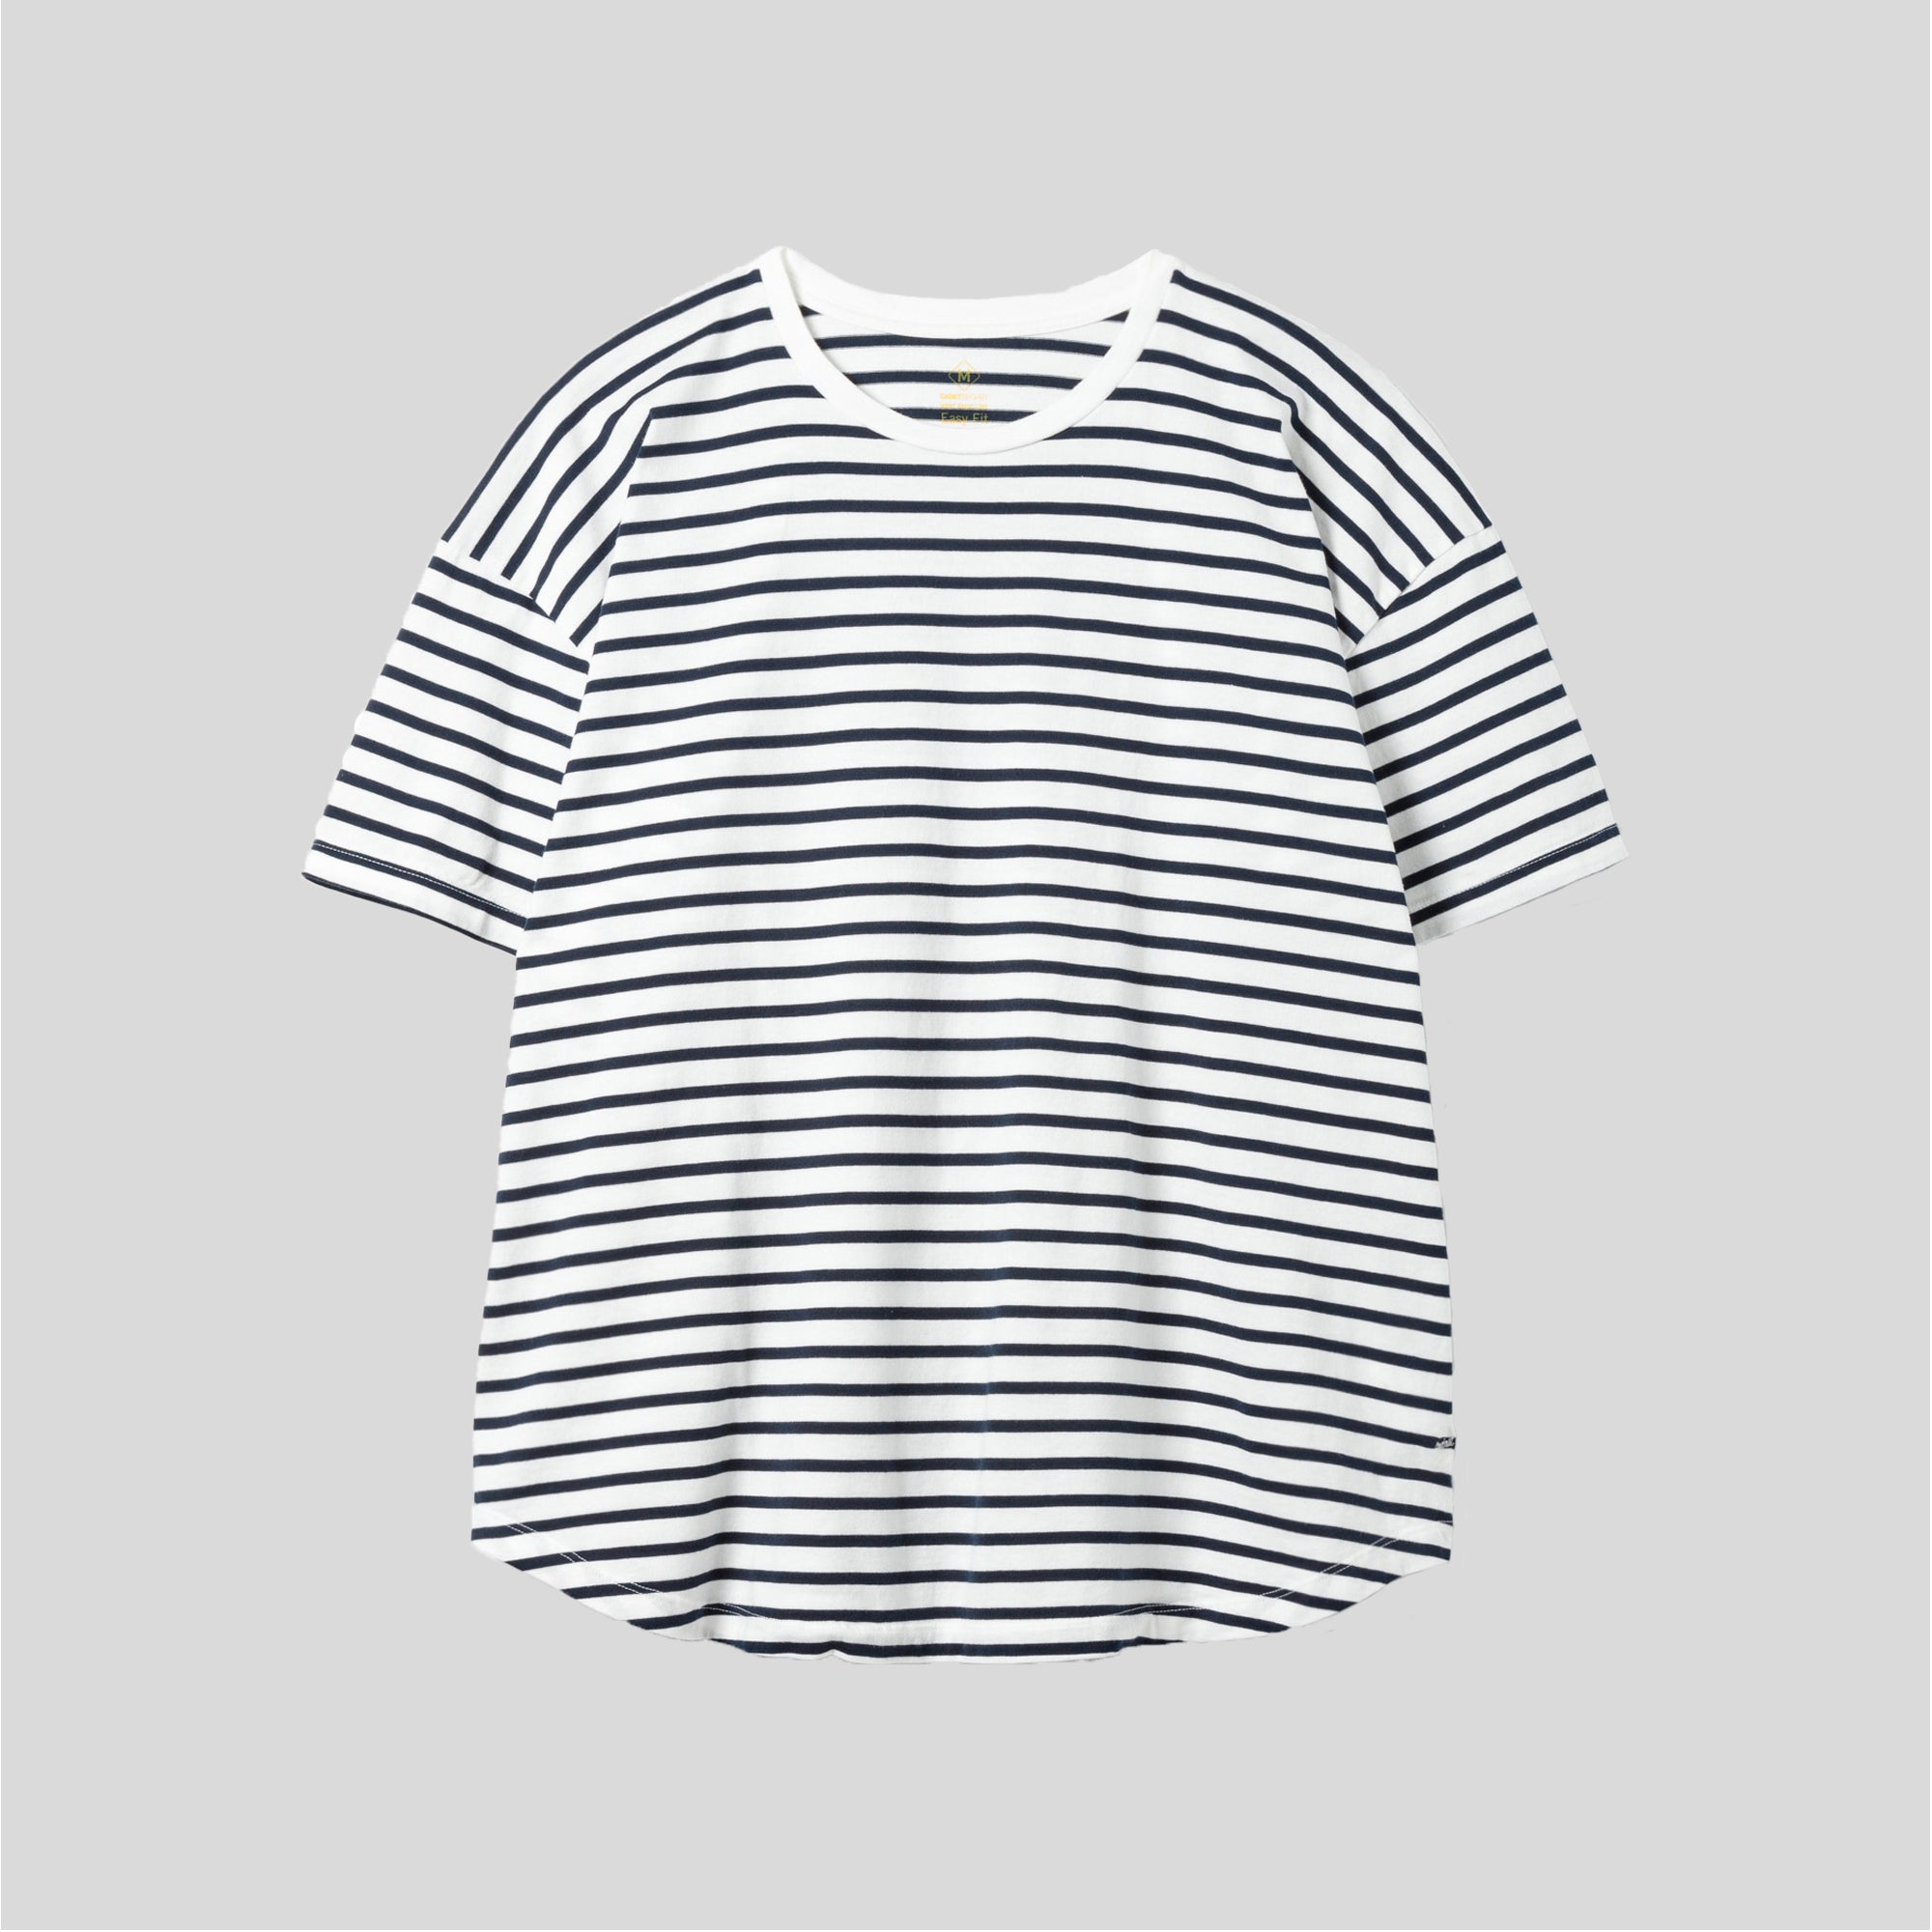 NEW好評 サンディニスタ CADET EASY FIT BORDER L-S TEE G8bSF